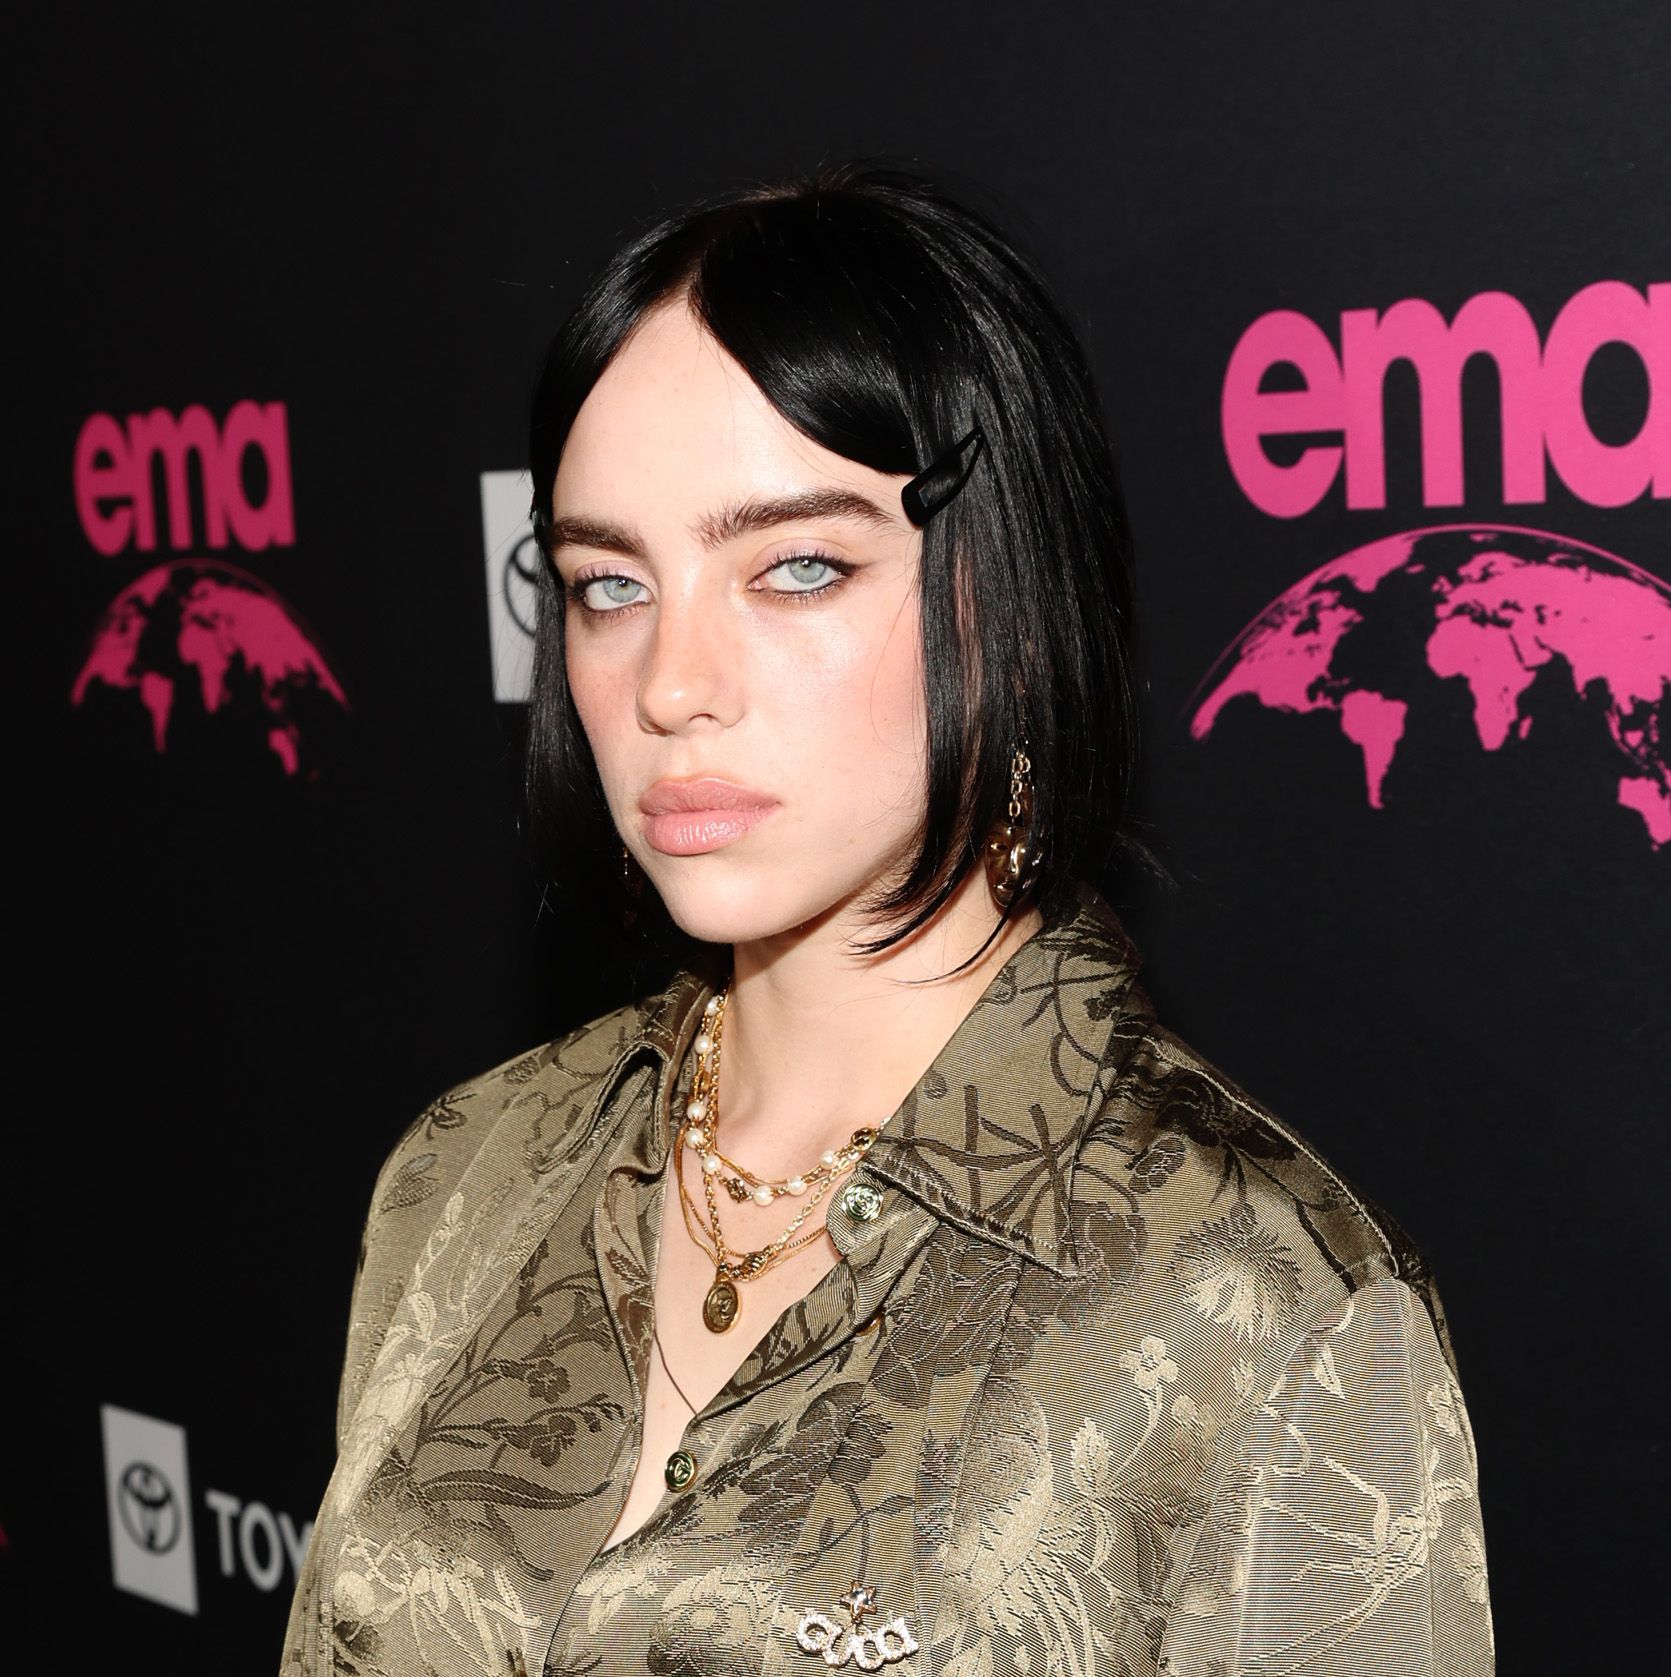 Billie Eilish Is the Latest Celeb to Rock the Exposed Bra Trend